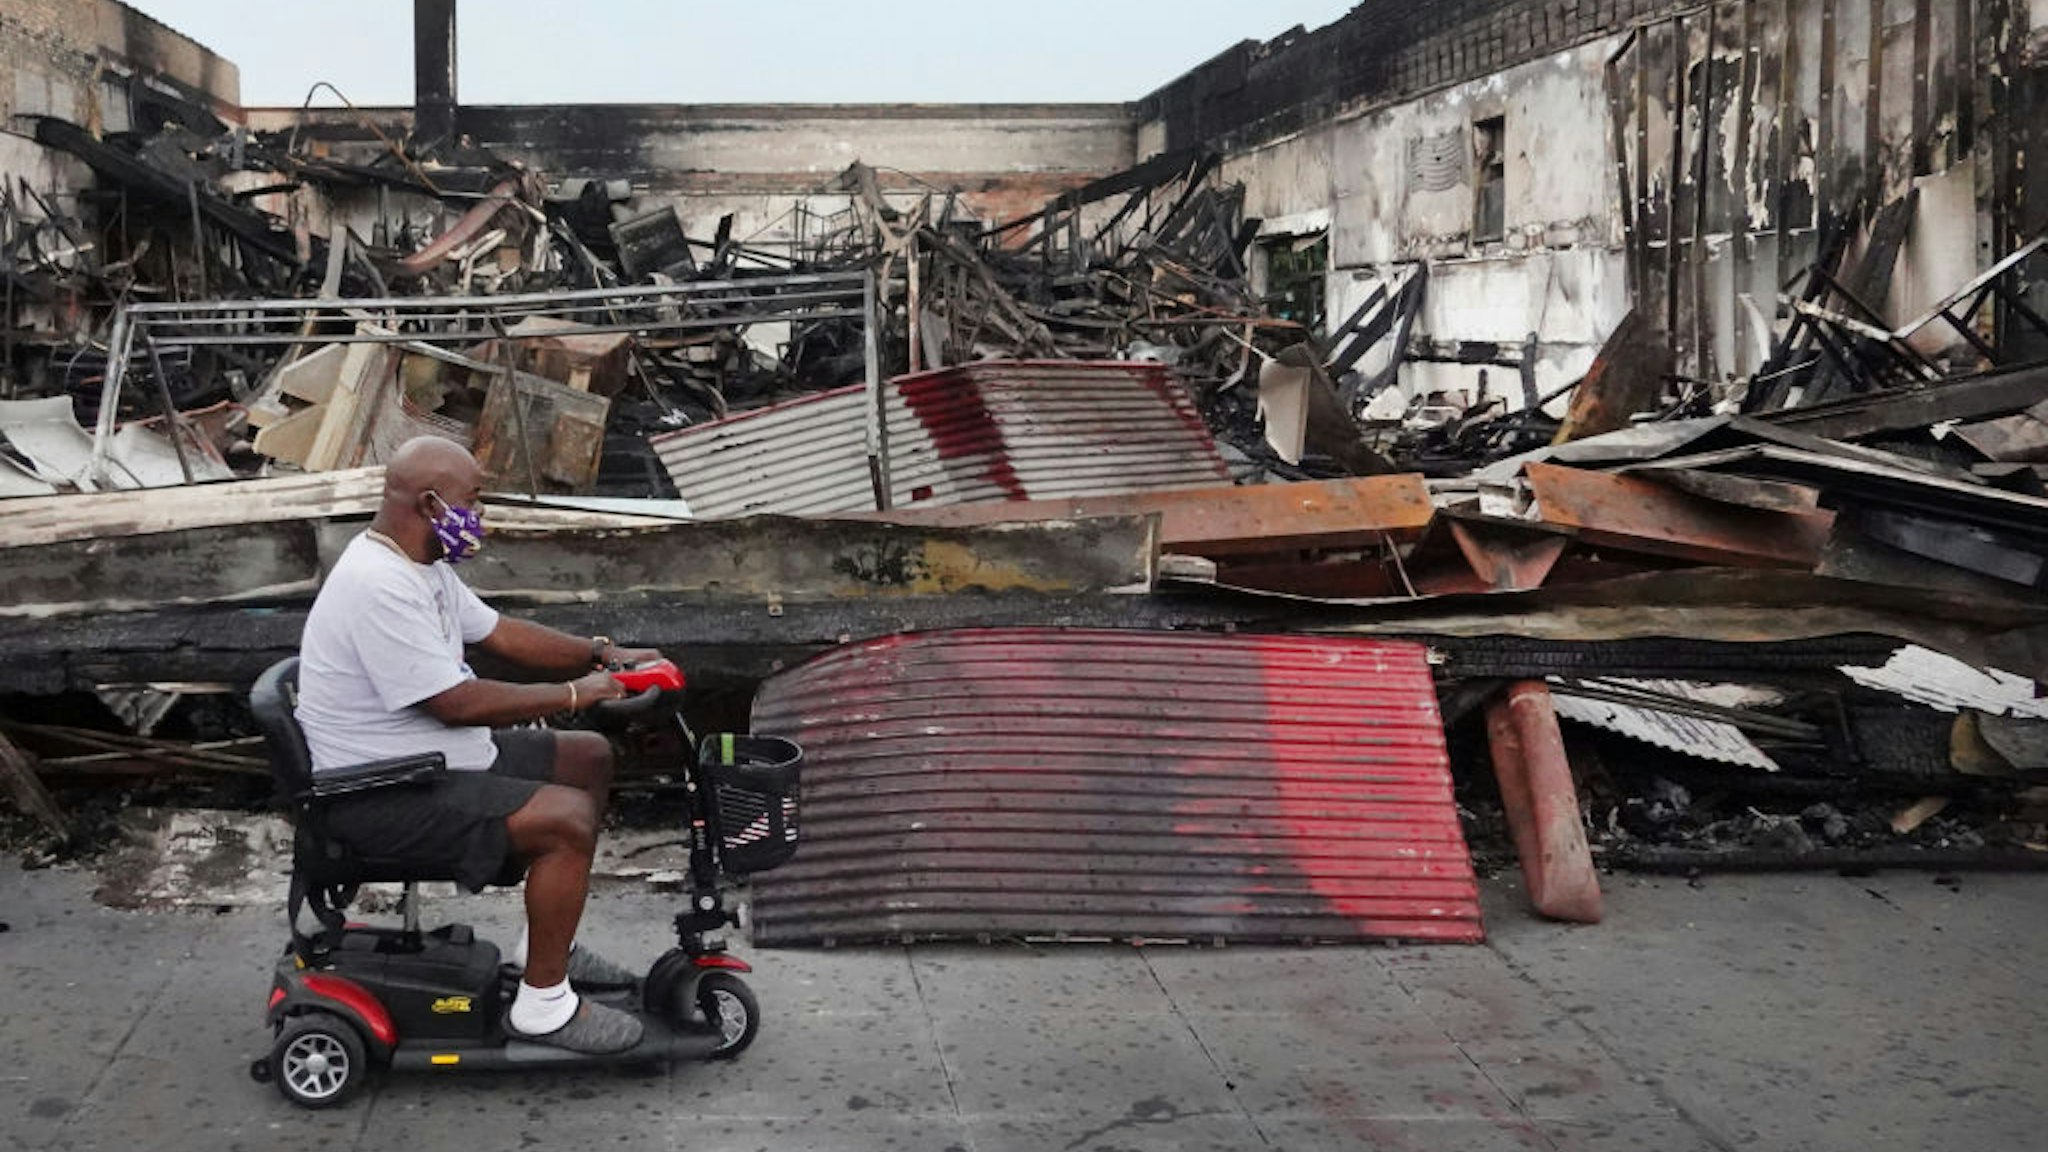 A man rides a scooter past the charred wreckage of a building after being burned to the ground during last week's rioting sparked by the death of George Floyd on June 2, 2020 in Minneapolis, Minnesota.